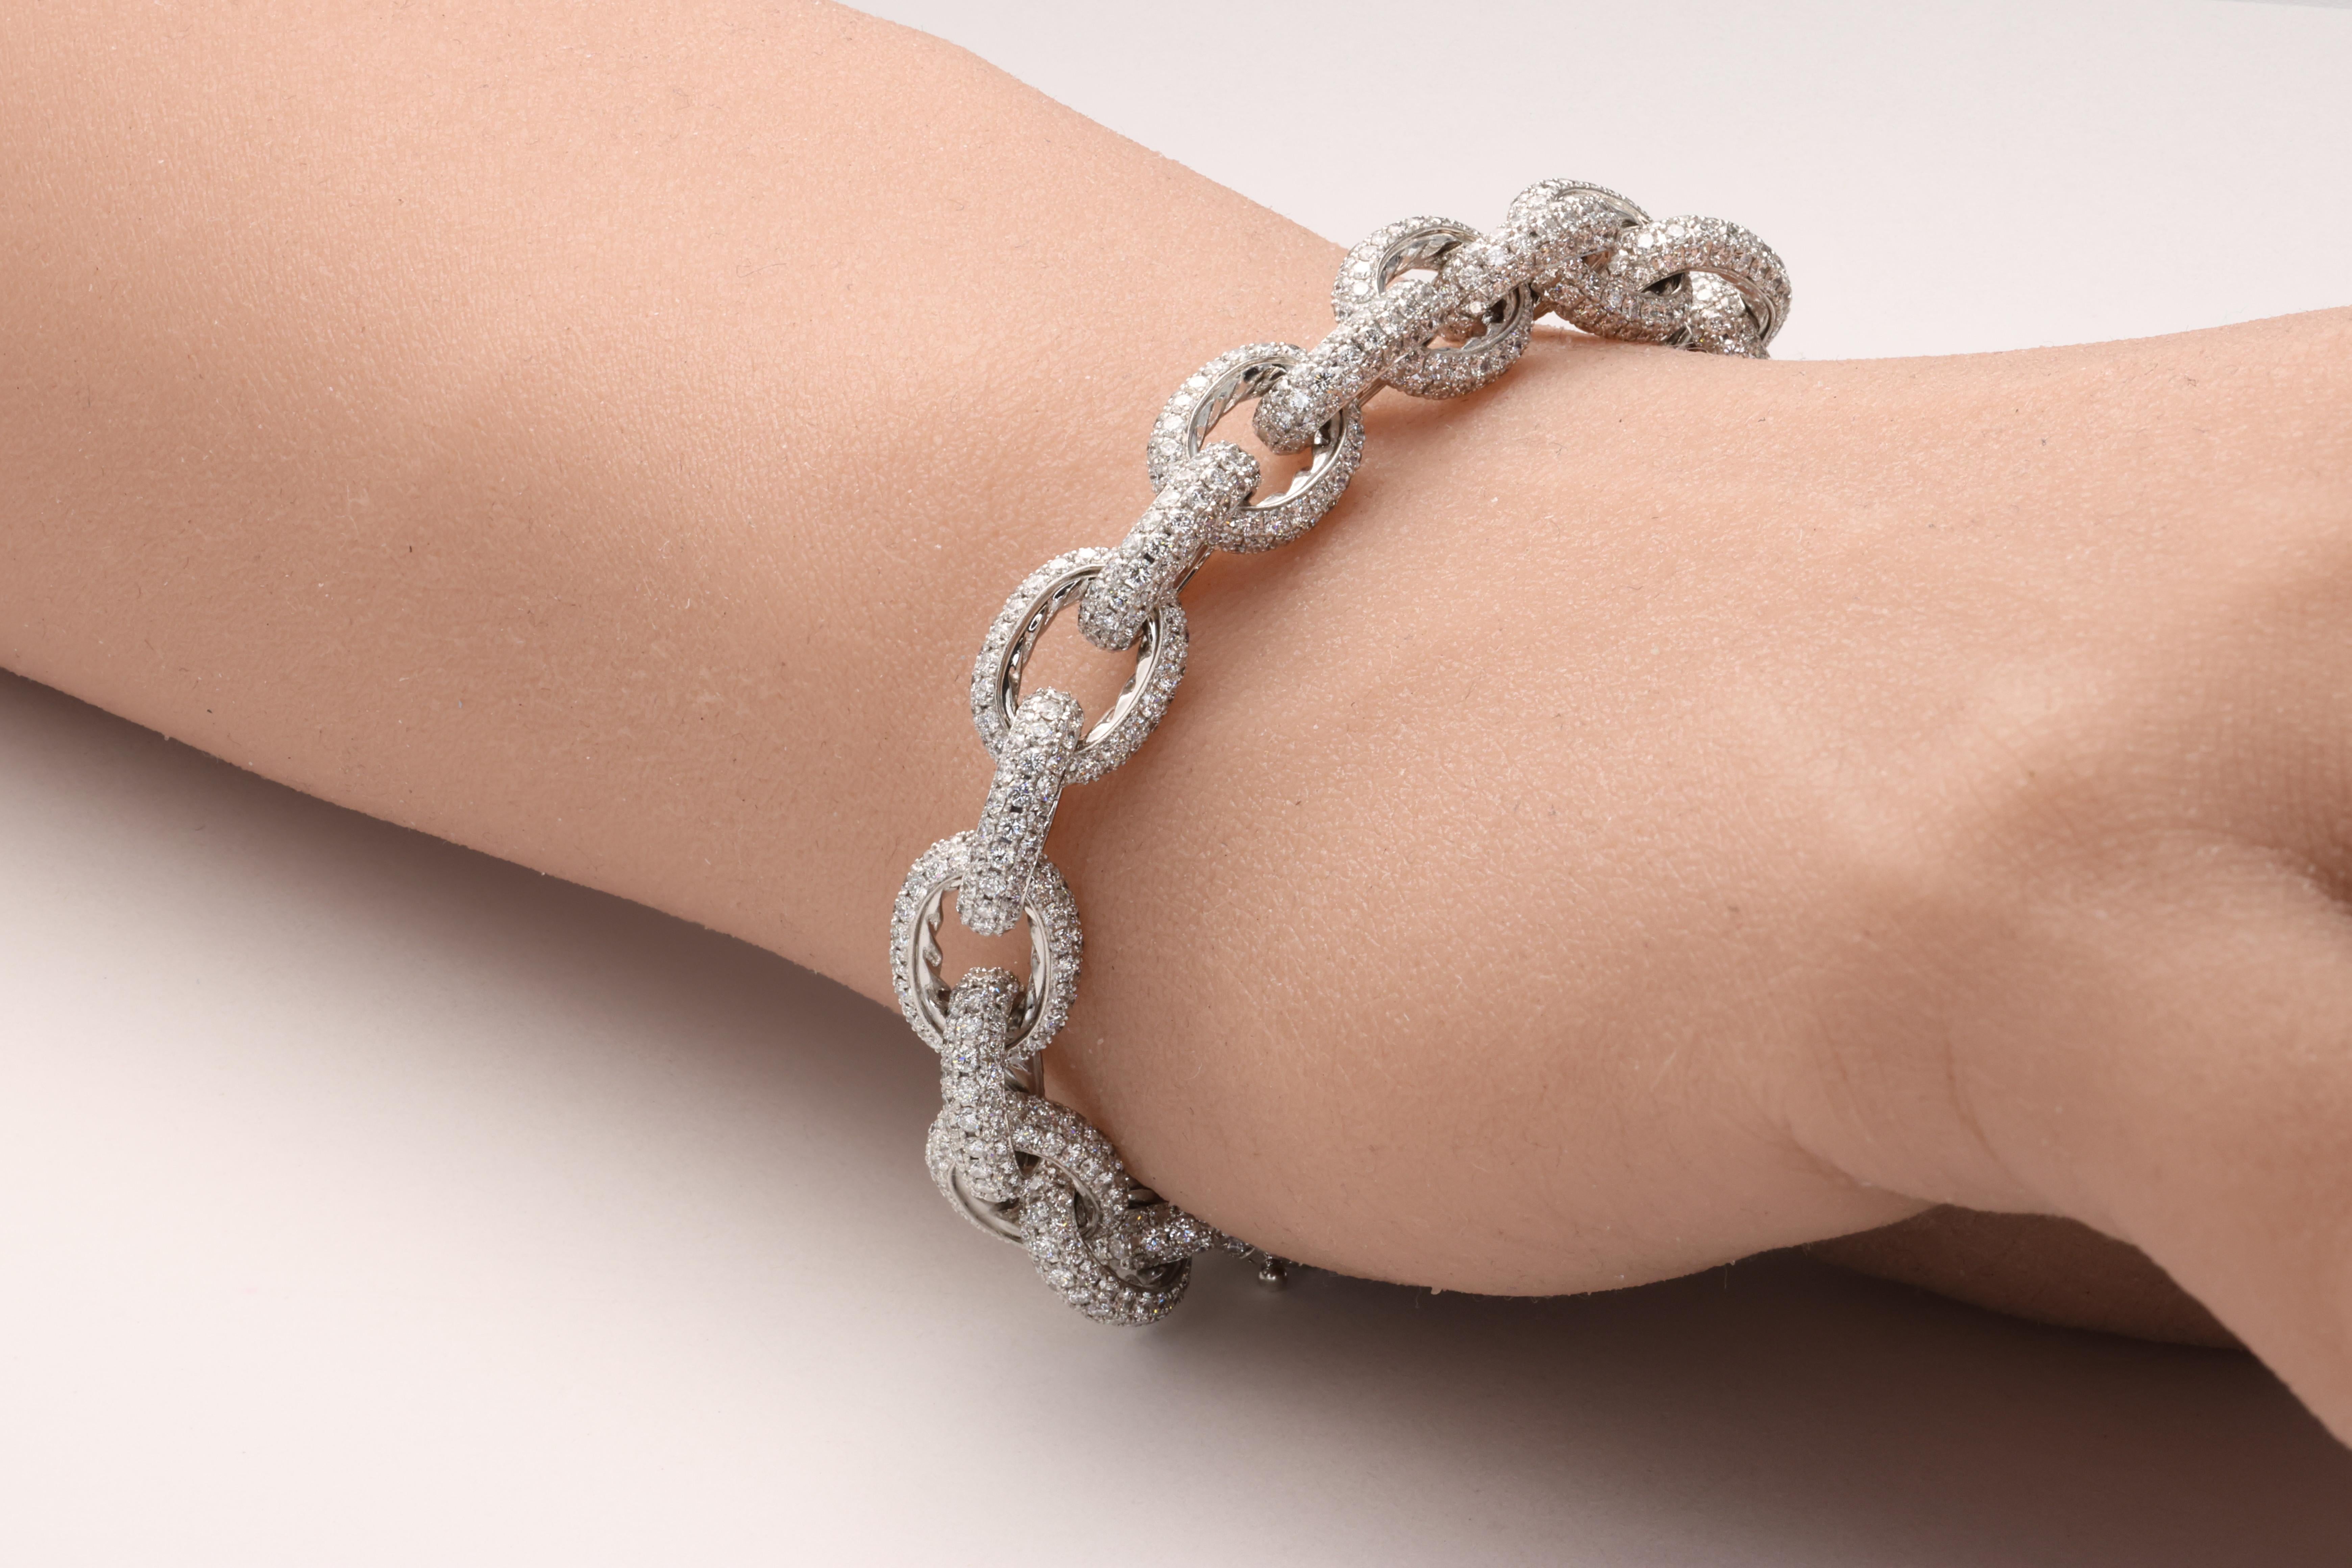 This outstanding bracelet finely crafted by David Yurman in 18 karat white gold is pave set with approximately 13.50 carats of fine quality E-G color VVS-VS clarity round brilliant cut diamonds in 3 rows covering the entire circumference of each